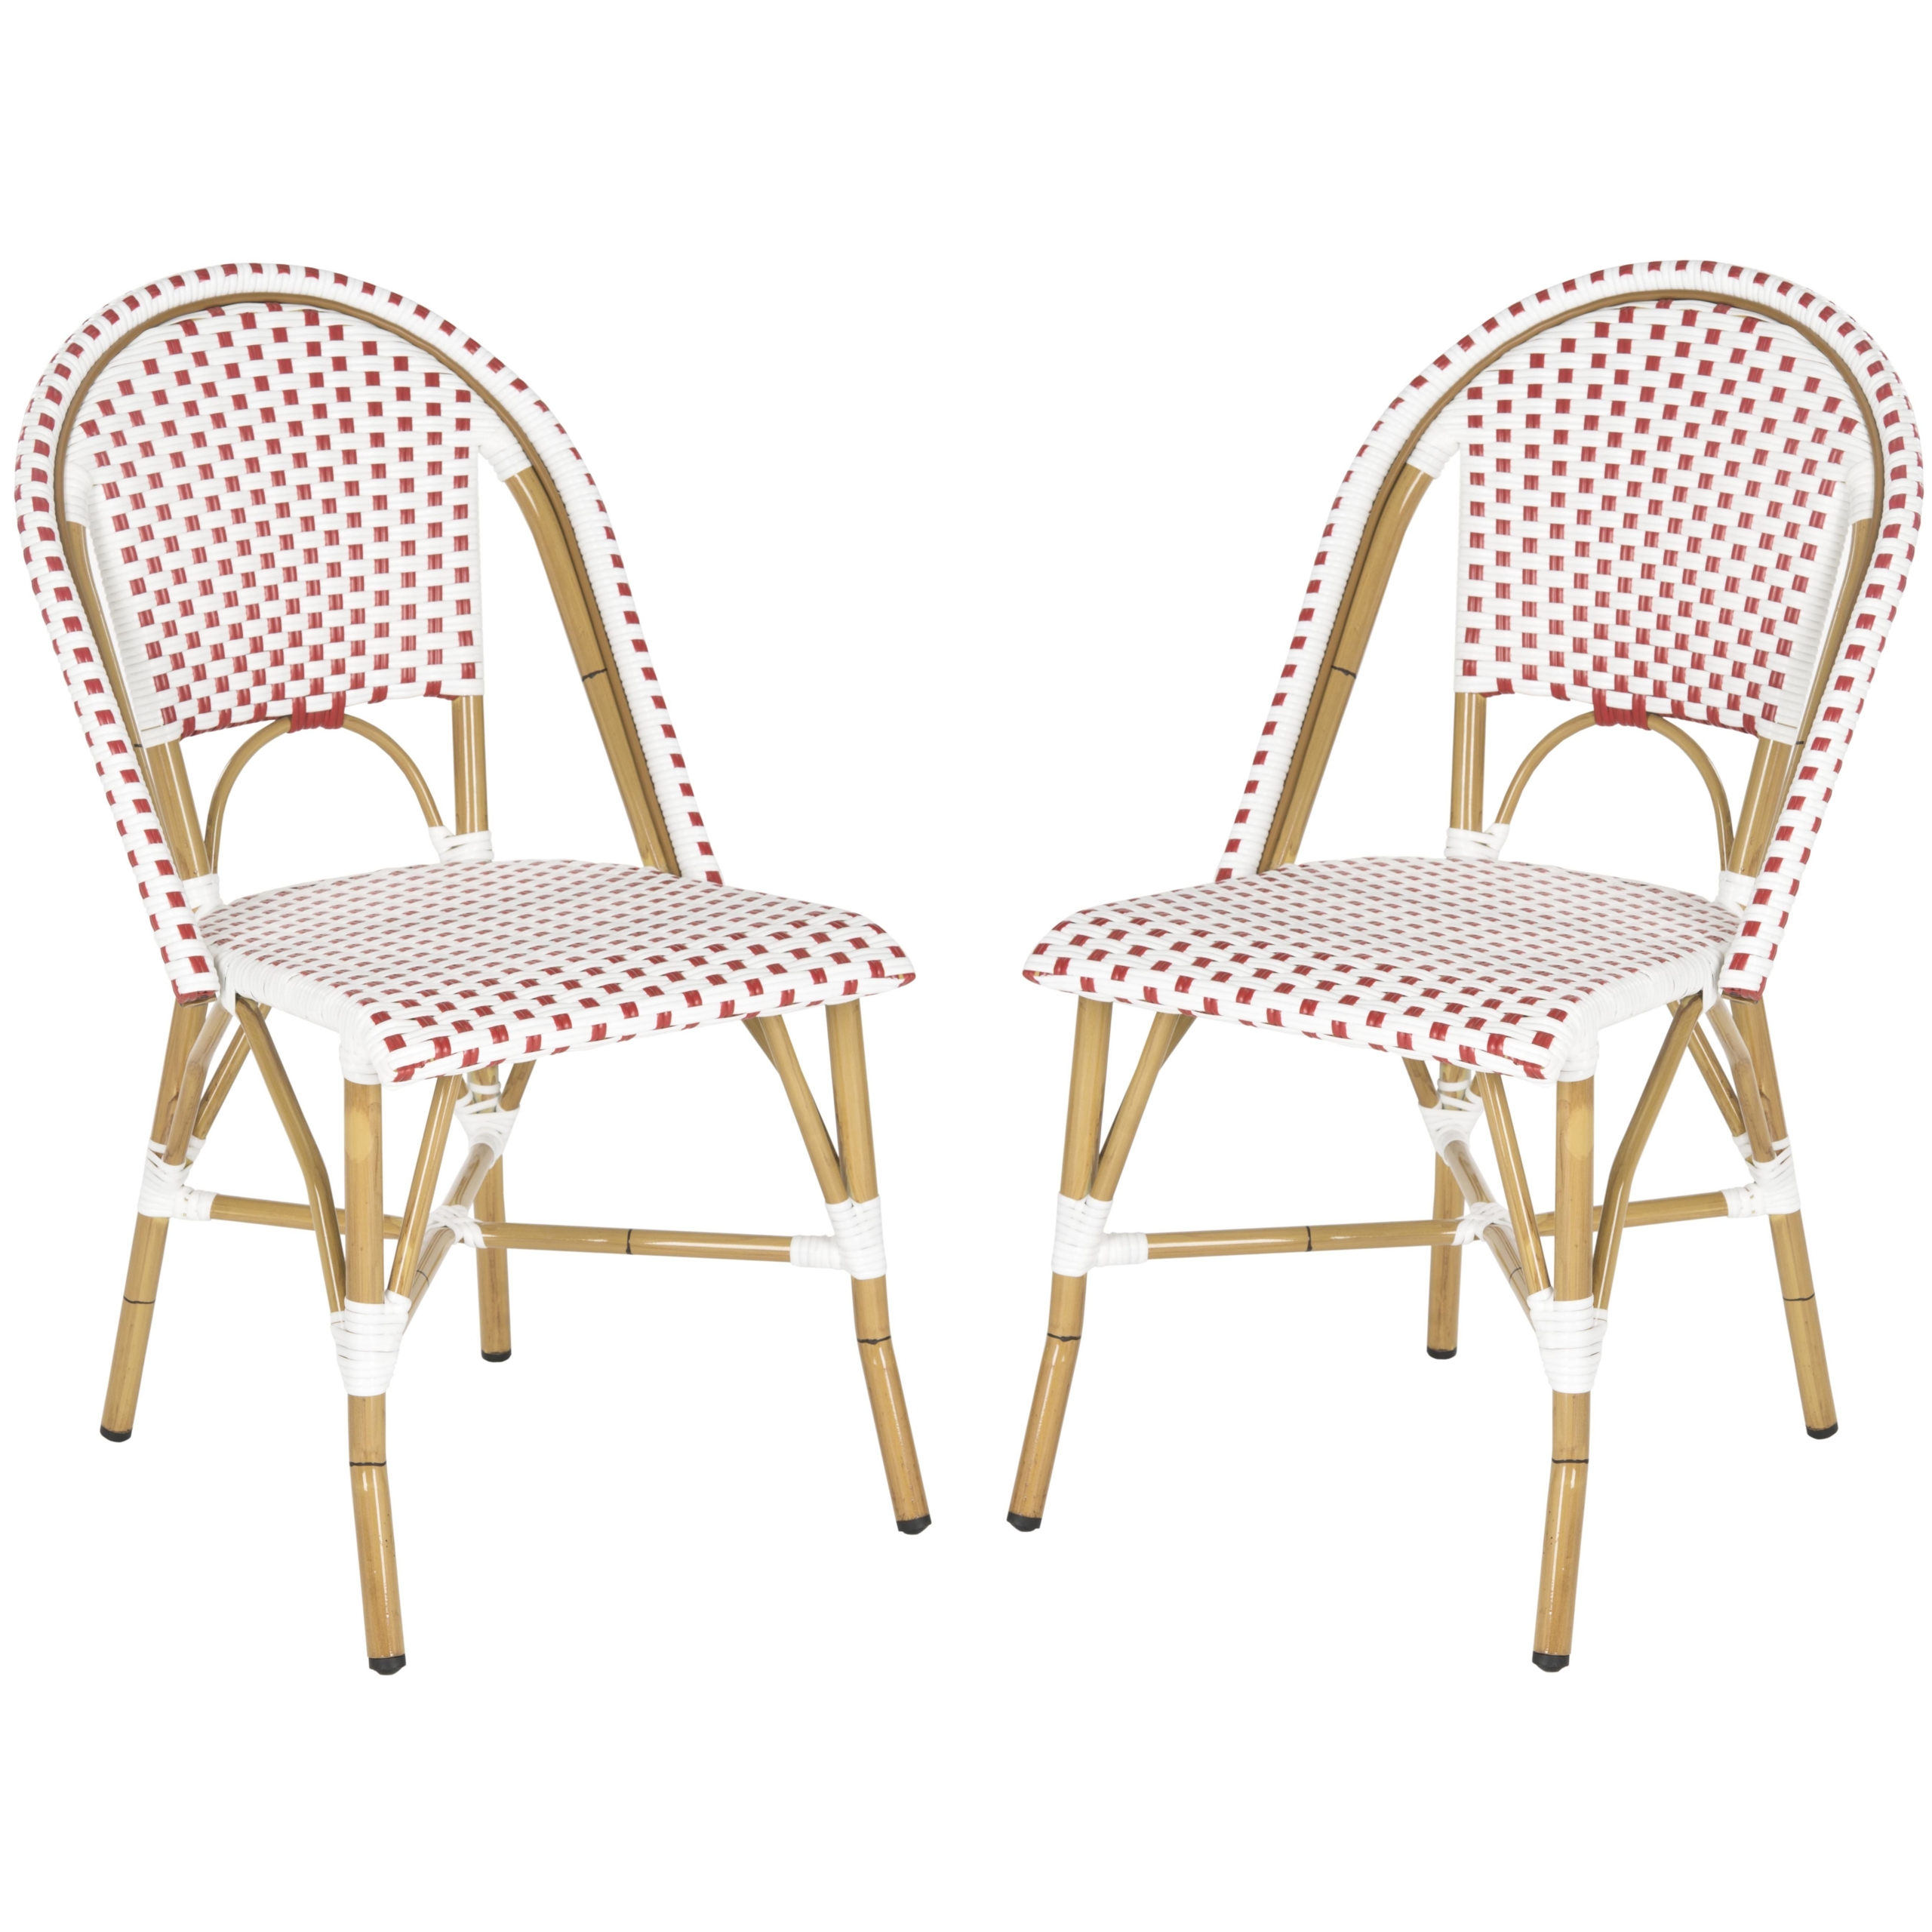 Wicker stacking arm chairs 3